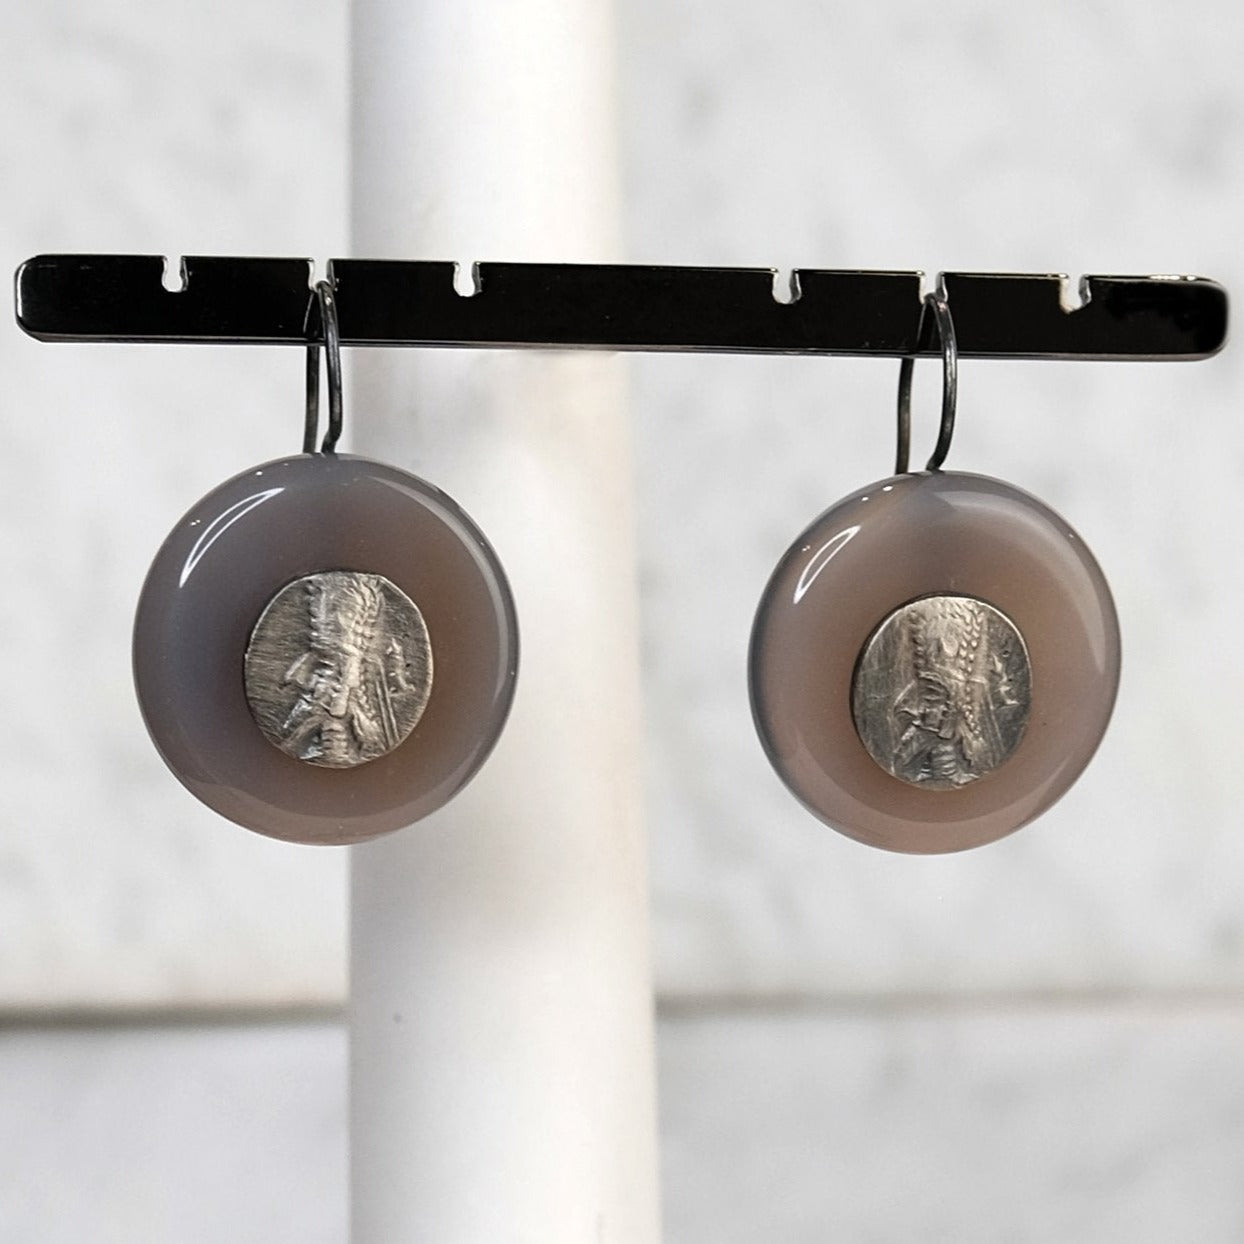 The Madstone Roman coin earrings